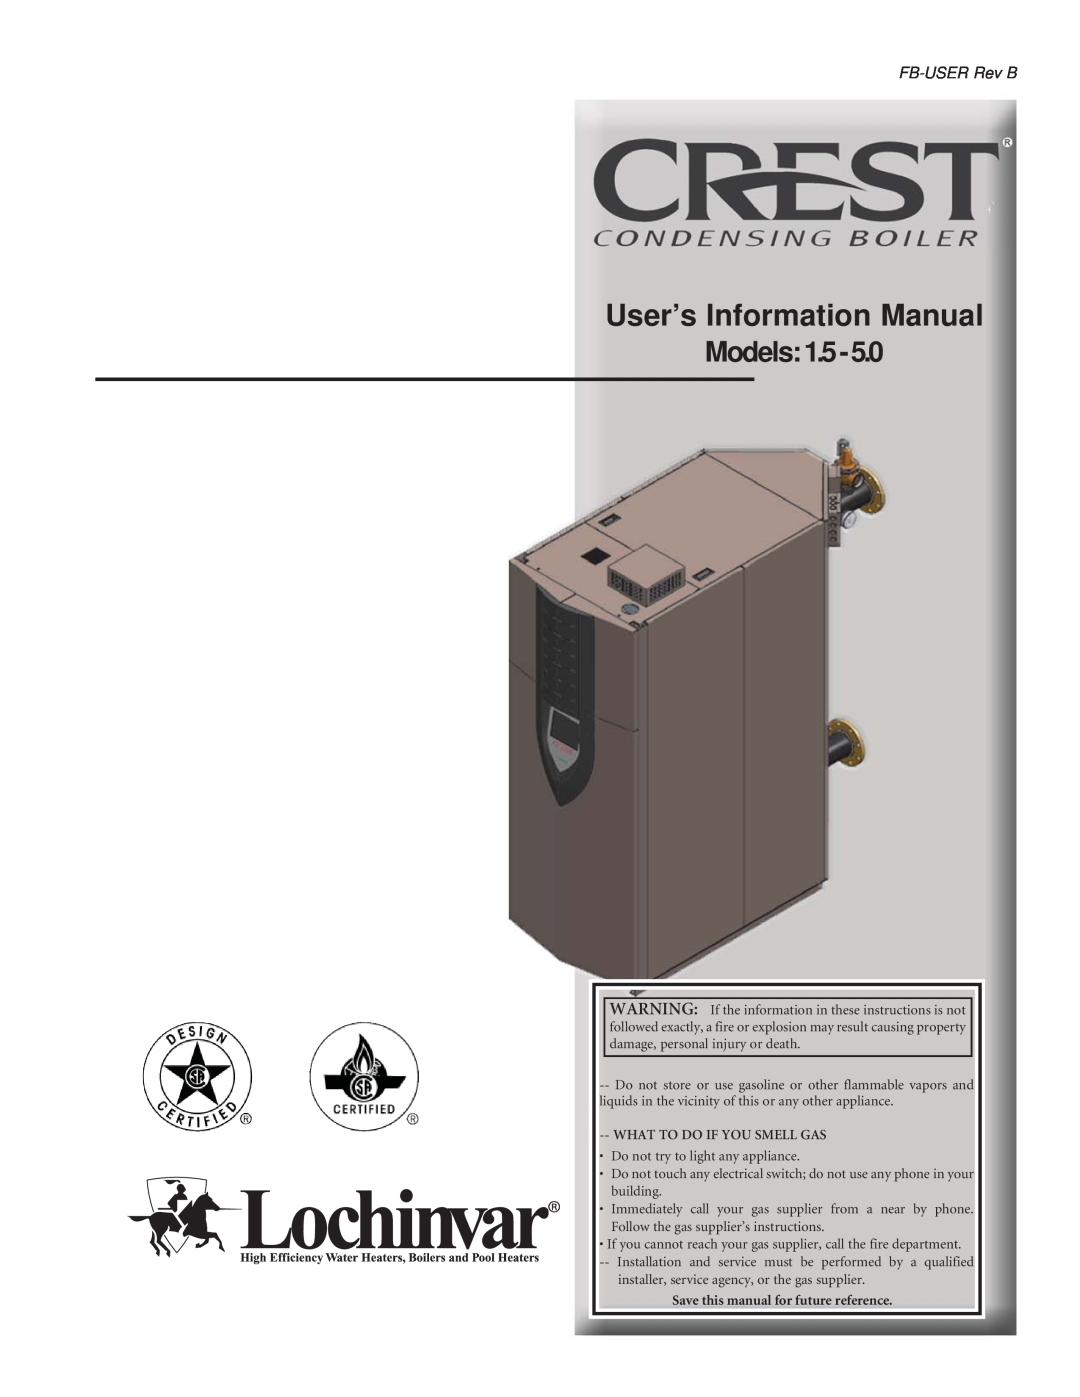 Lochinvar 1.5 manual Models, User’s Information Manual, FB-USERRev B, What To Do If You Smell Gas 